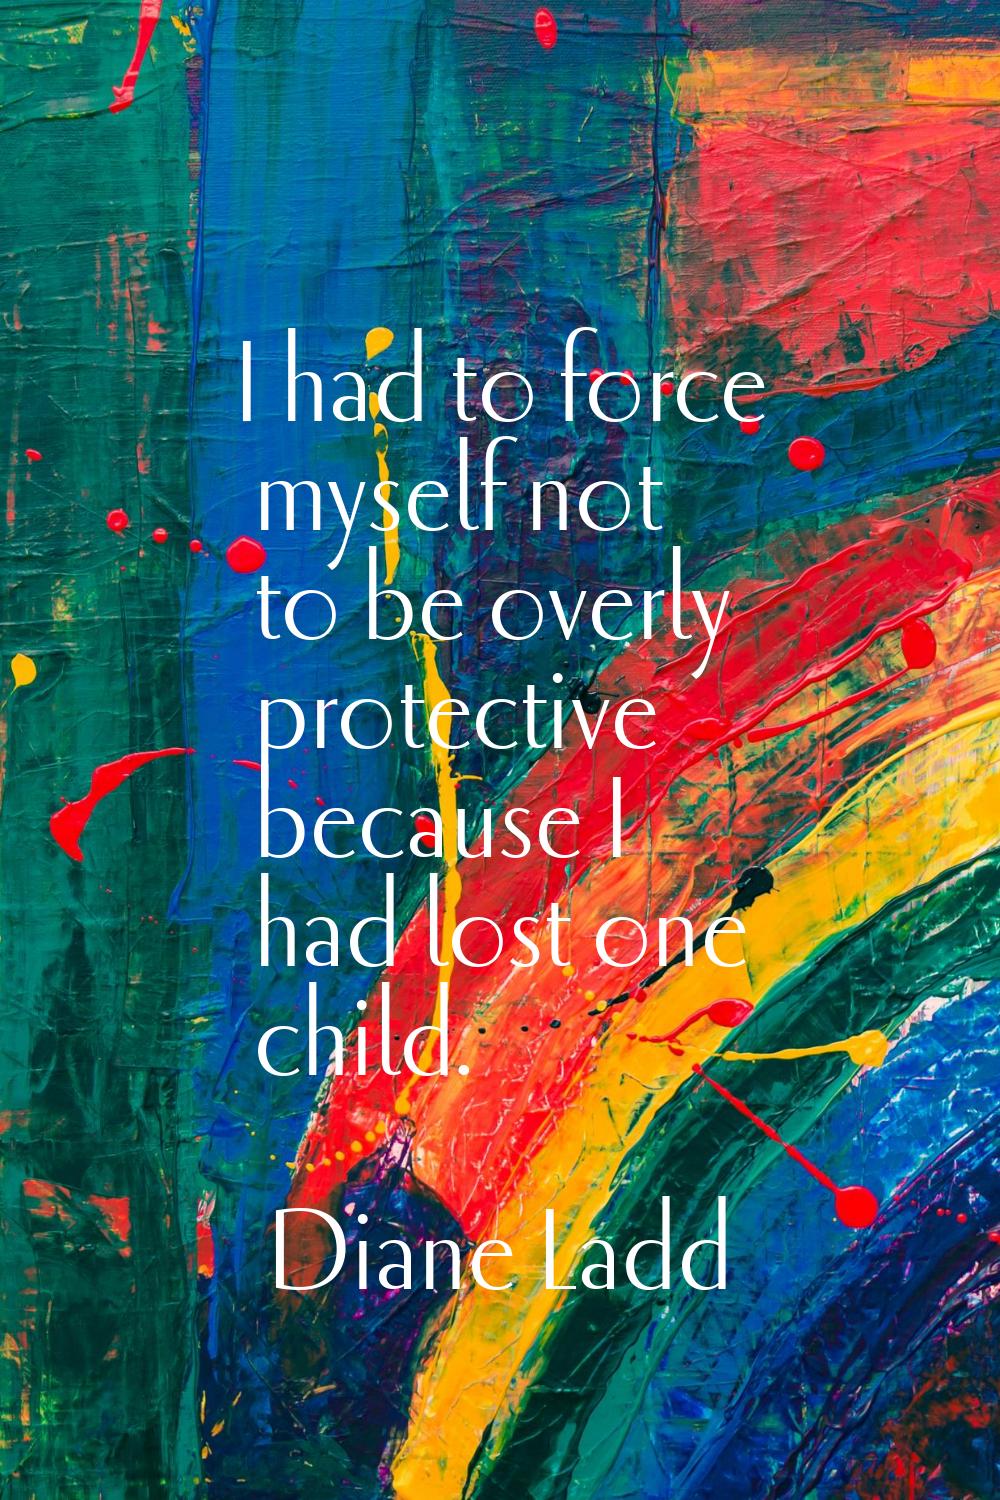 I had to force myself not to be overly protective because I had lost one child.